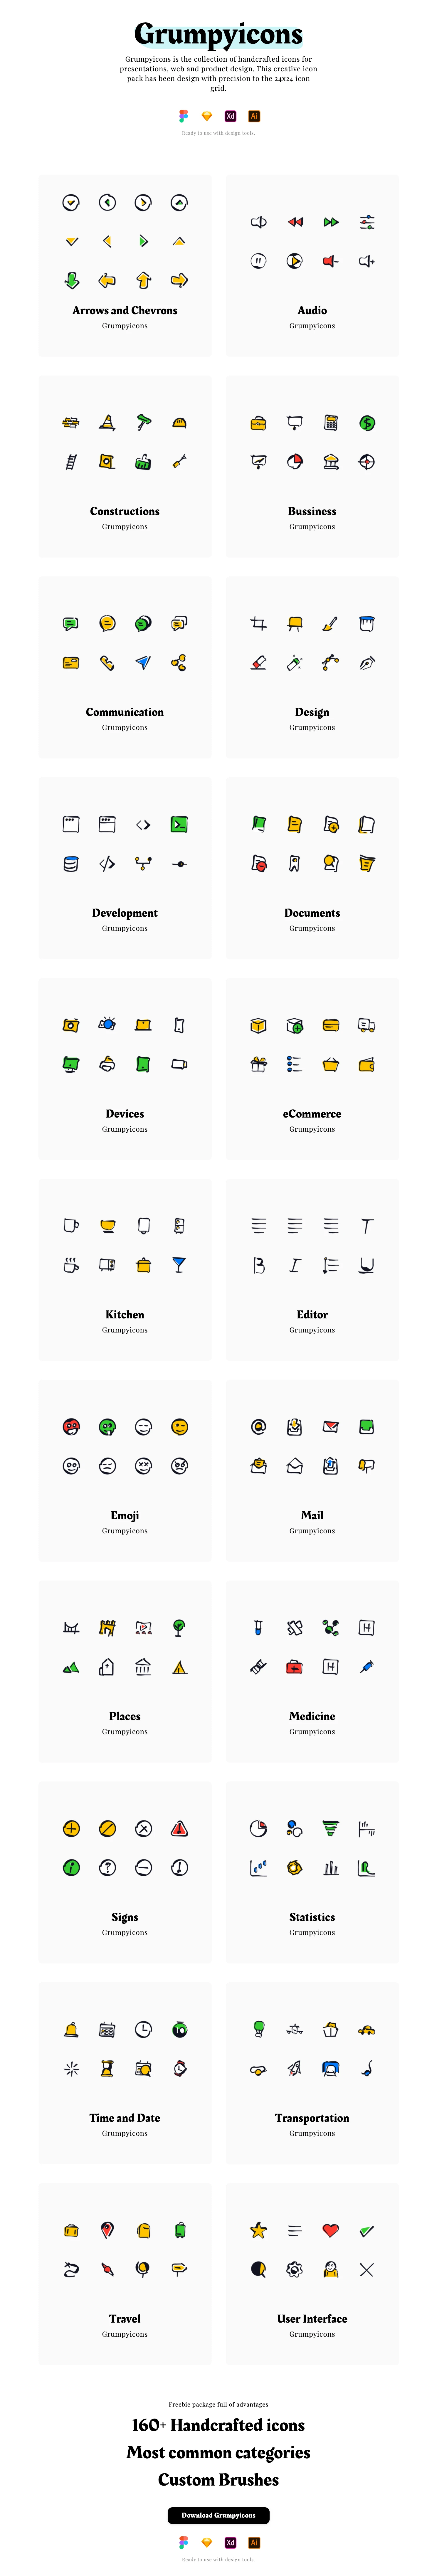 Grumpyicons Free Icons Pack - Grumpyicons is the collection of handcrafted icons for presentations, web and product design. This creative icon pack has been design with precision to the 24x24 icon grid.